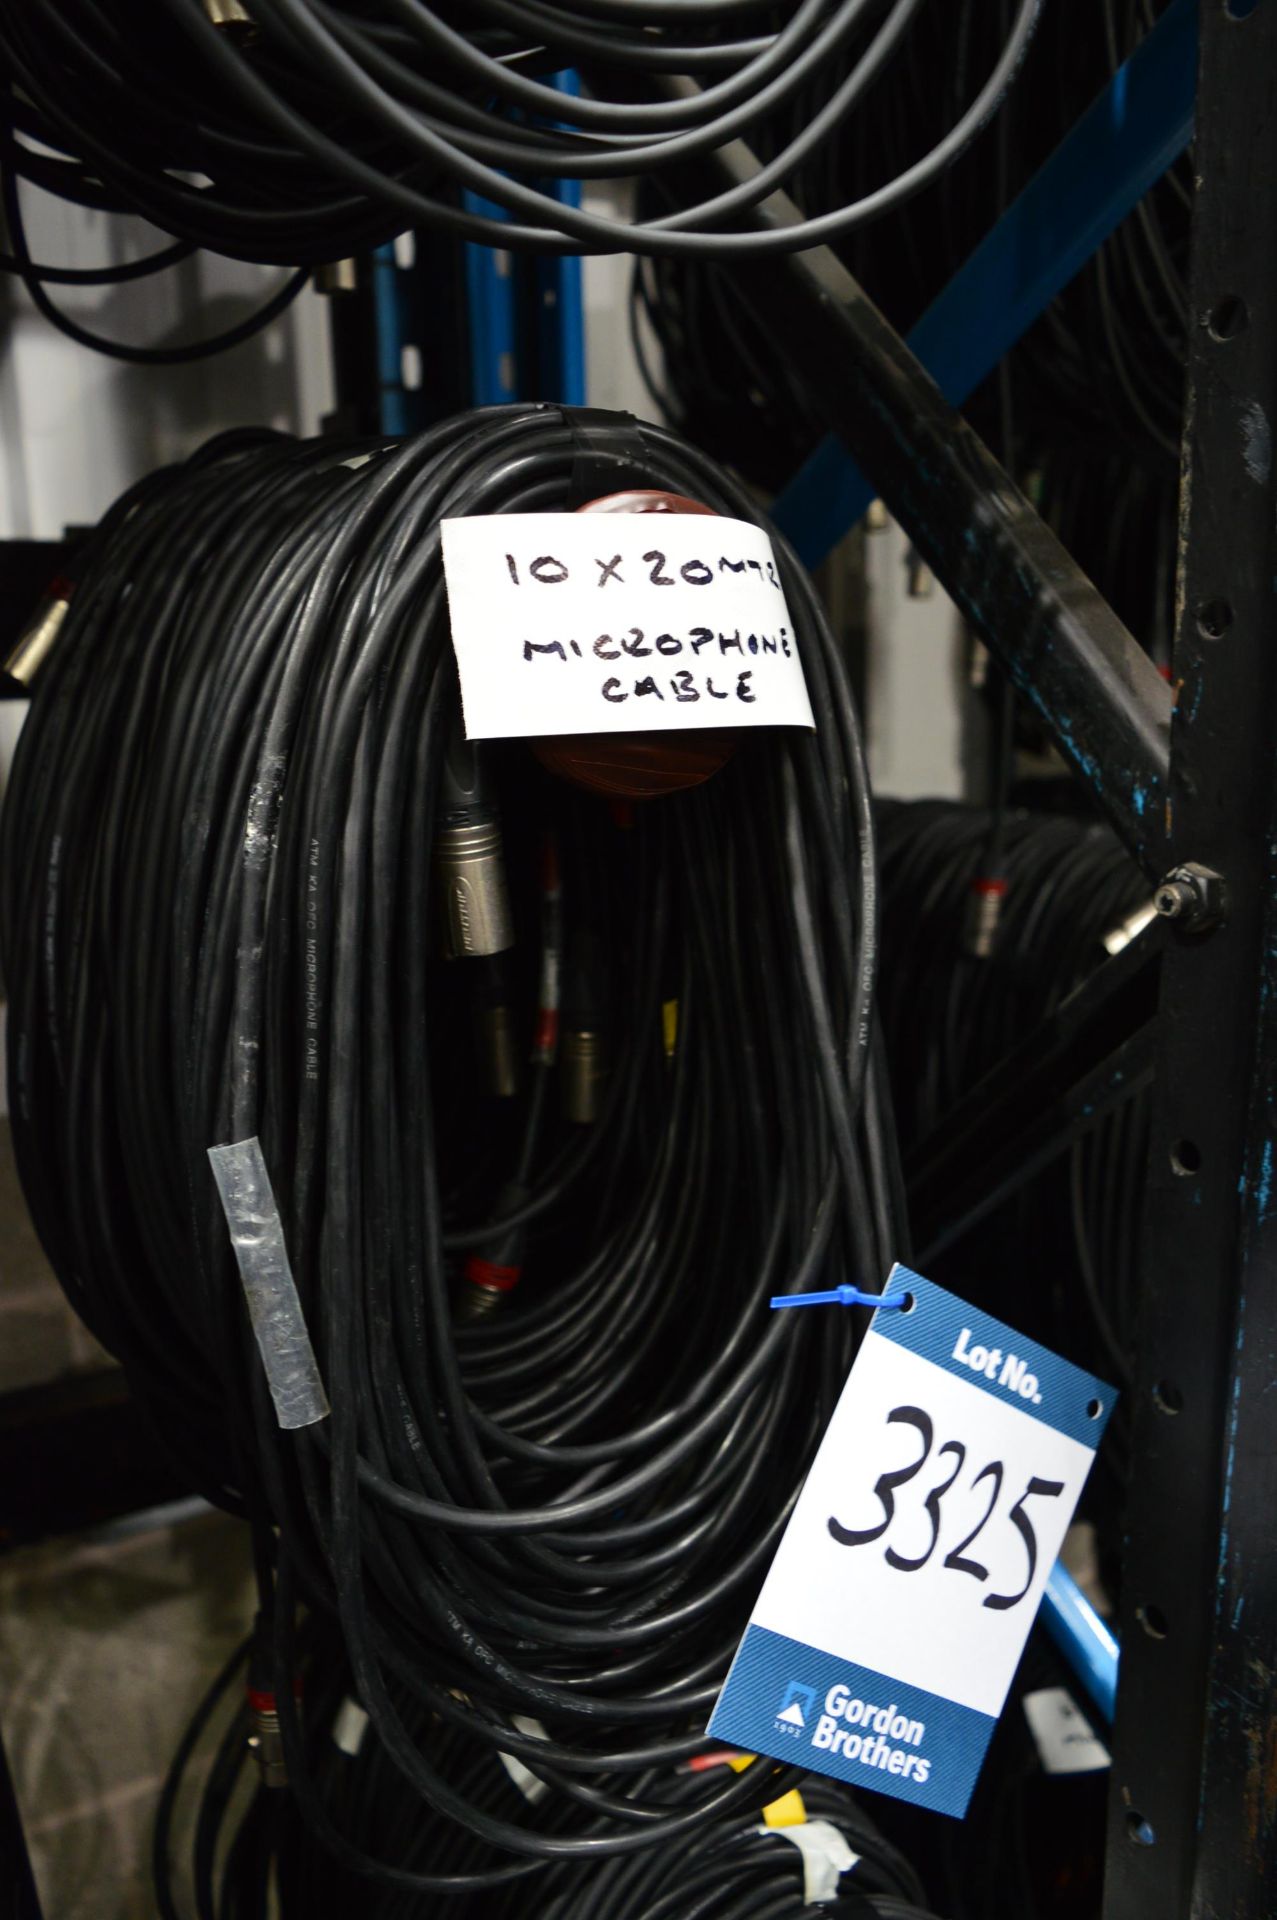 20x 20m microphone cables: Unit 500, Eckersall Road, Birmingham B38 8SE - Image 2 of 3